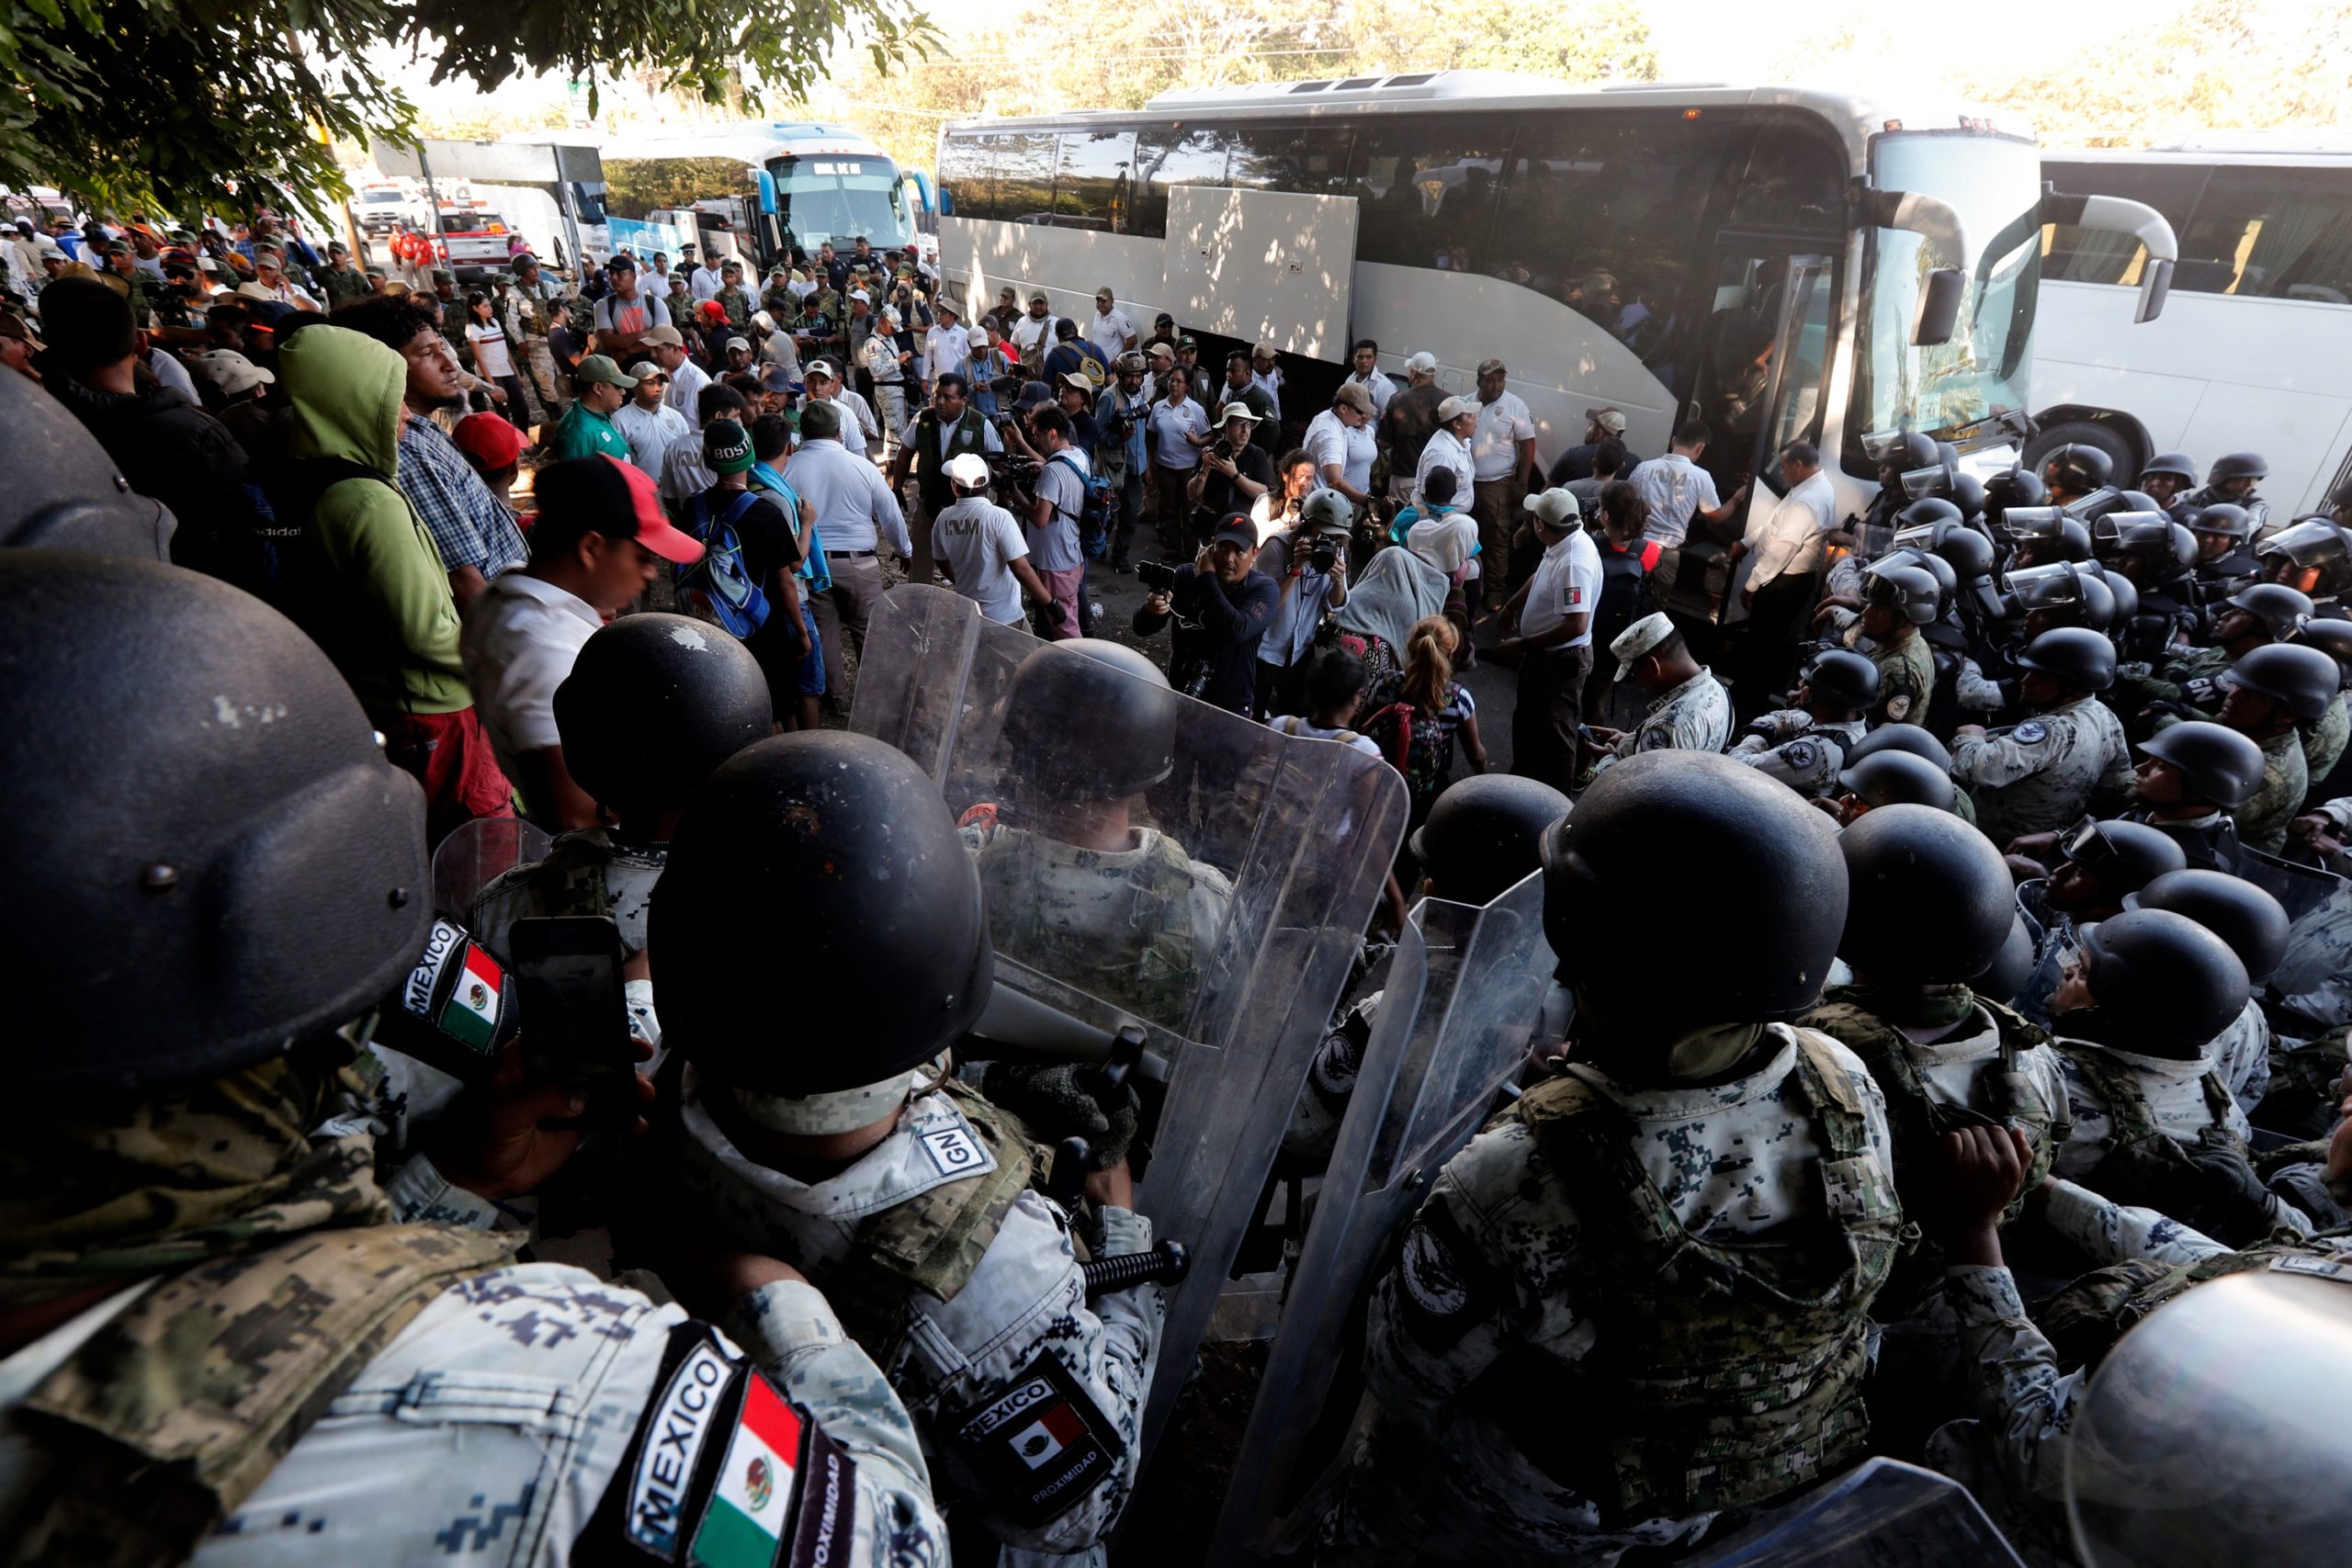 Migrants board buses after their passage was blocked by Mexican National Guards near Tapachula, Mexico, Thursday, Jan. 23, 2020. Hundreds of Central American migrants crossed the Suchiate River into Mexico from Guatemala Thursday after a days-long standoff with security forces. (AP Photo/Marco Ugarte)